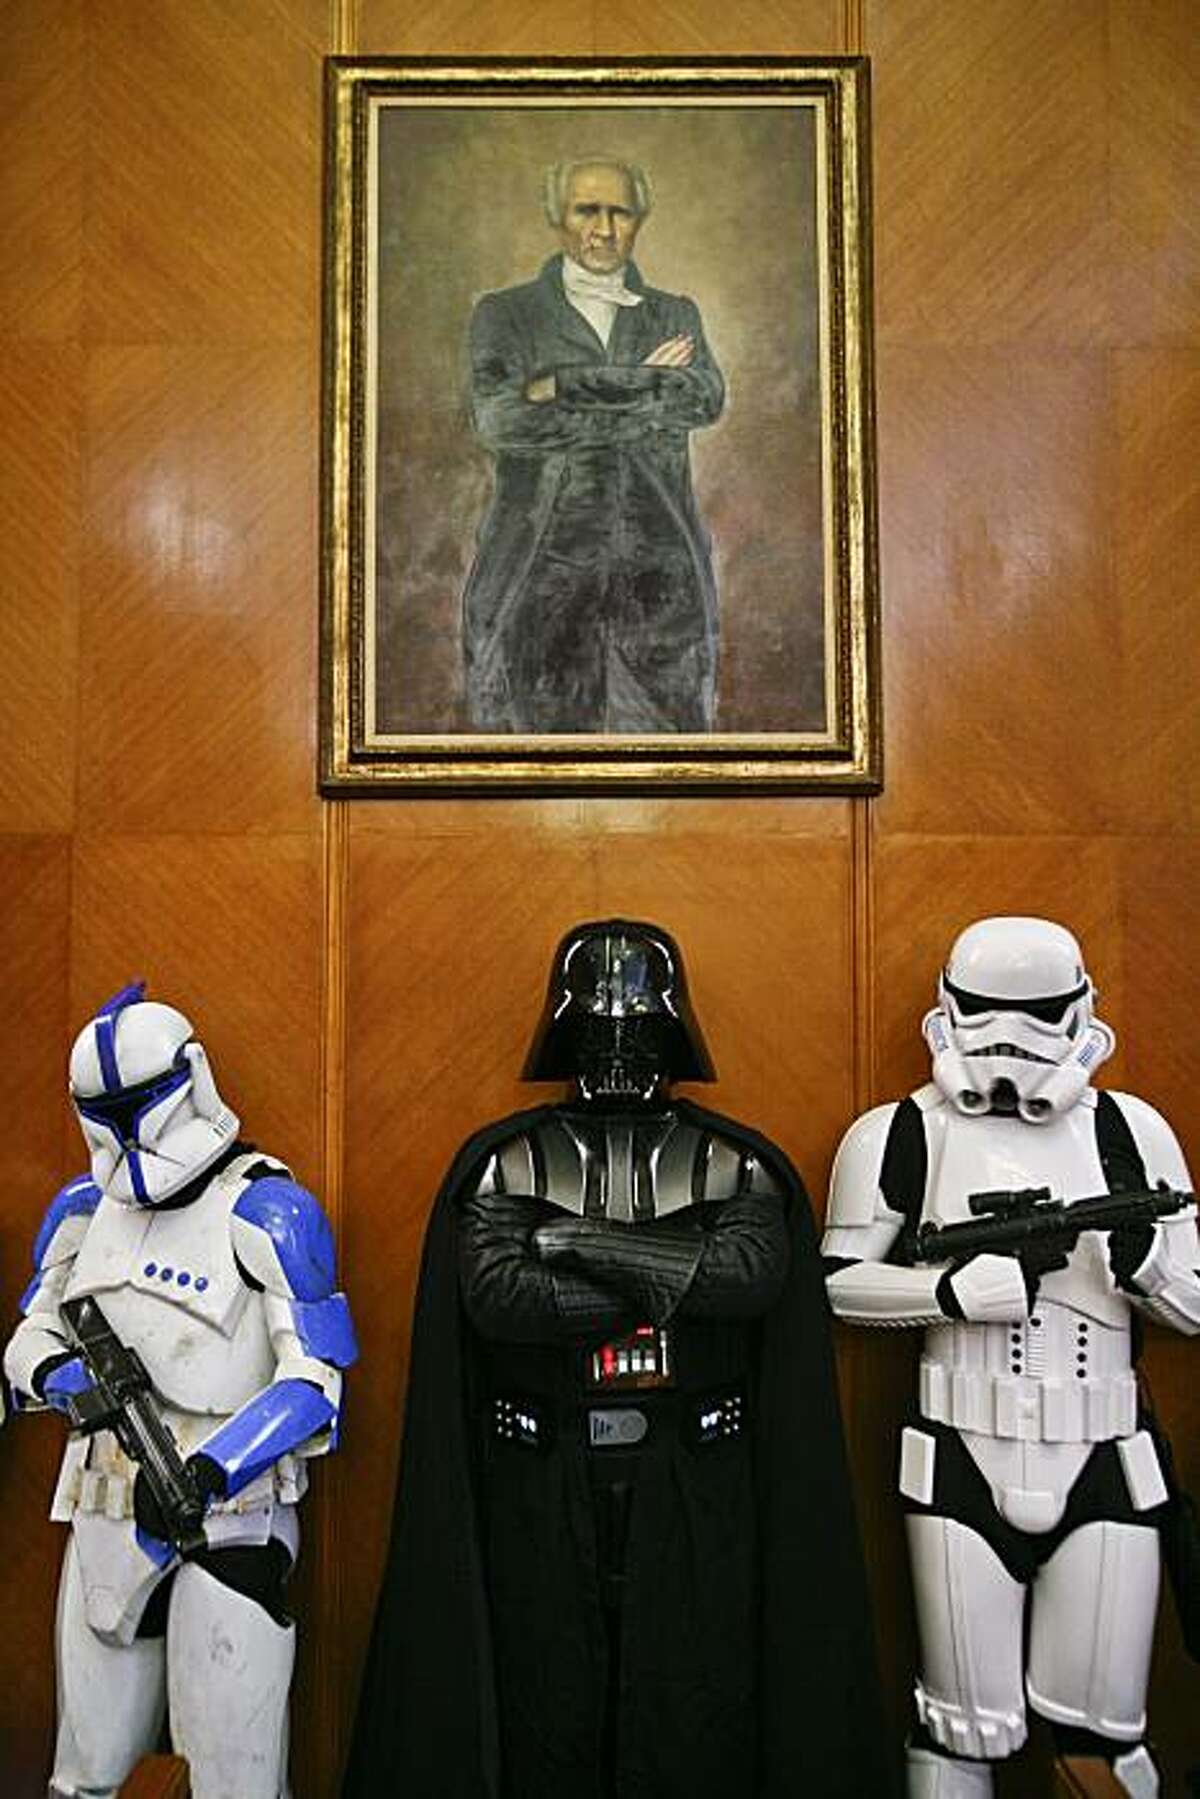 Members of the "501st Legion," an international group of Star Wars fans who own and wear realistic costumes from the movie saga, wait in Houston's City Council chamber before Mayor Annise Parker declared Tuesday, May 18, 2010, "Star Wars: The Clone Wars at Space Center Houston Day."